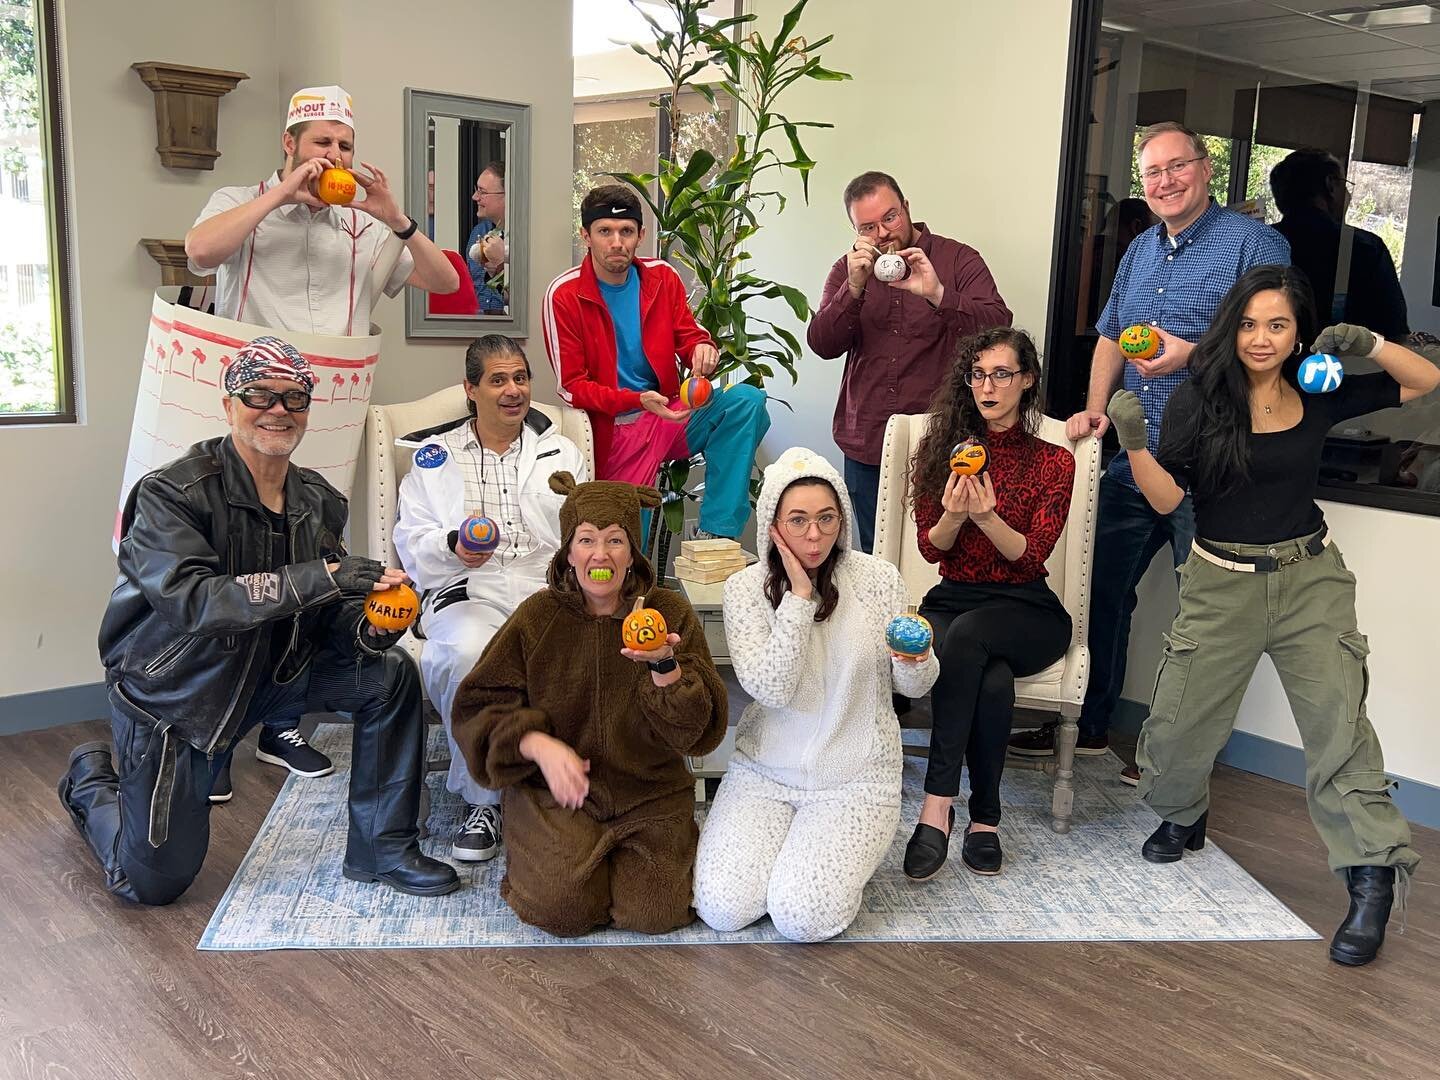 Who do you think wins for best costume? #rkmedia